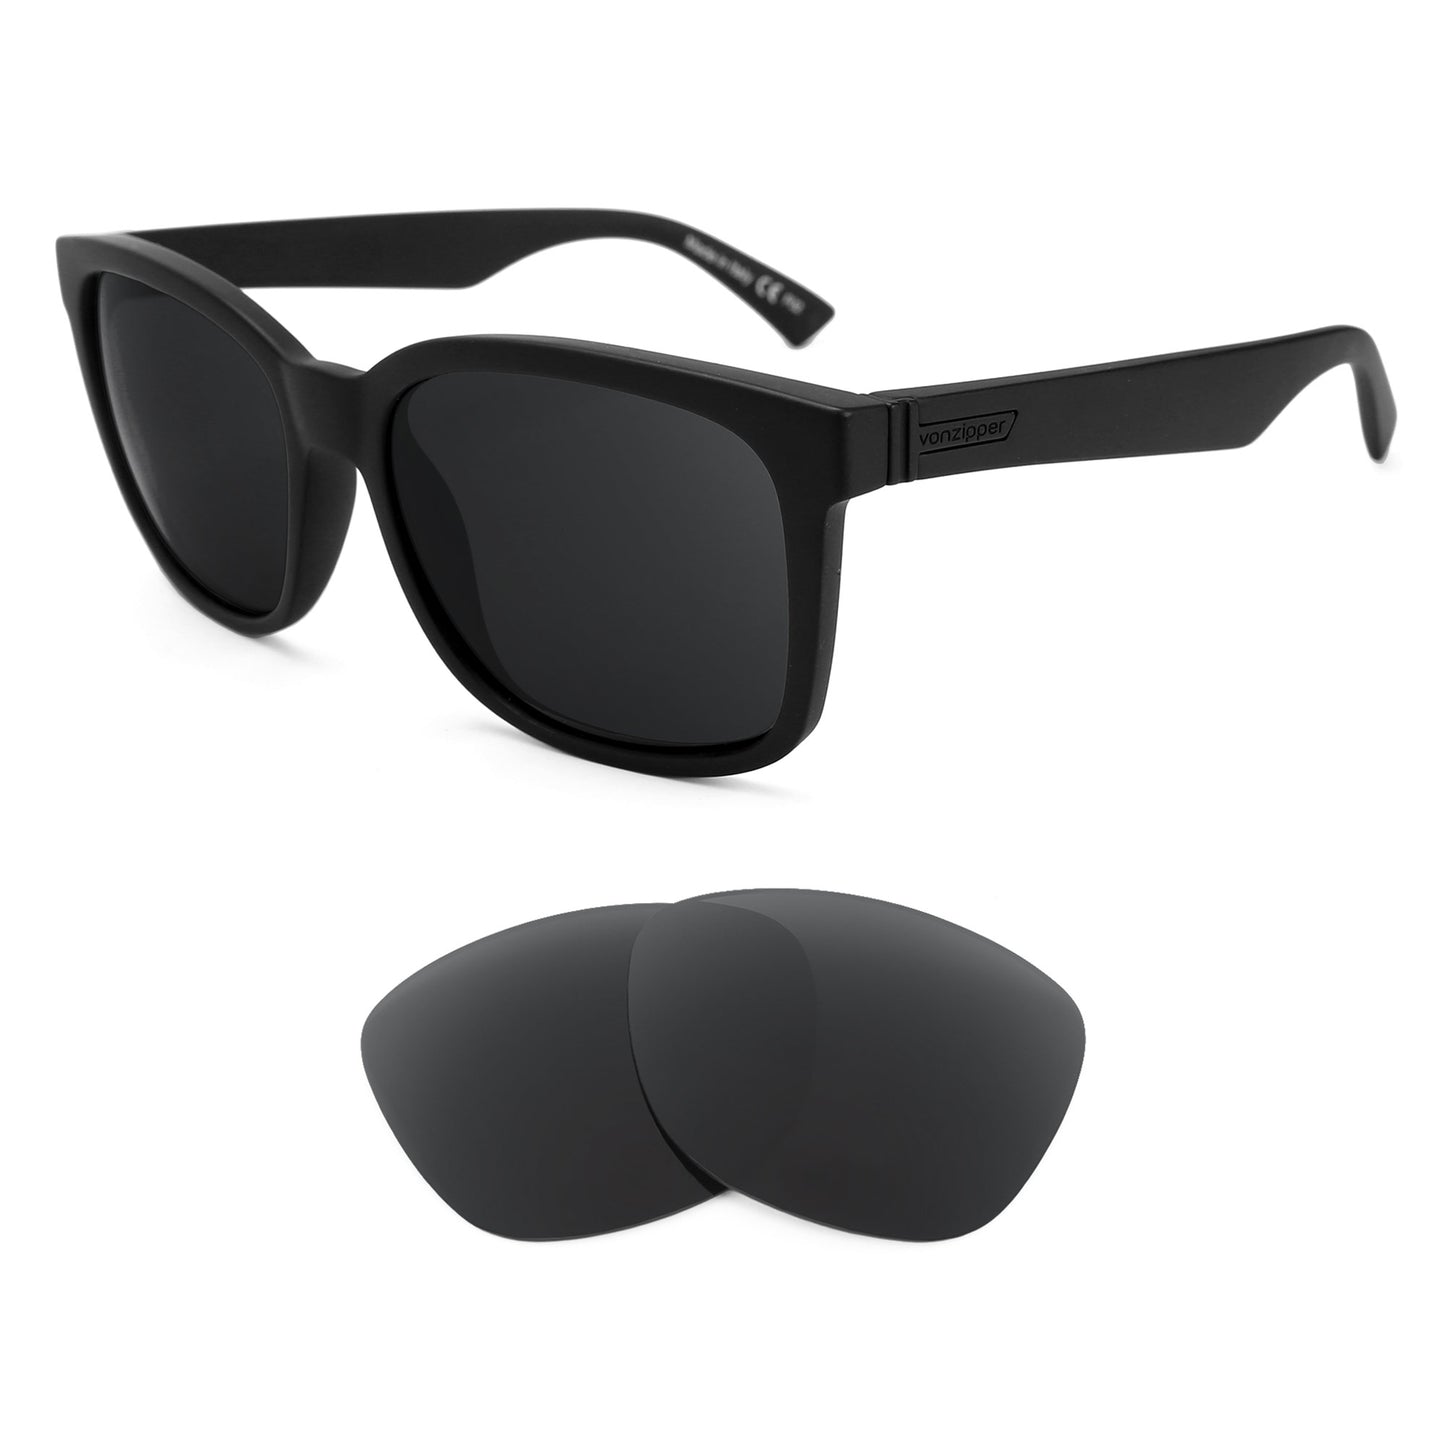 VonZipper Howl sunglasses with replacement lenses